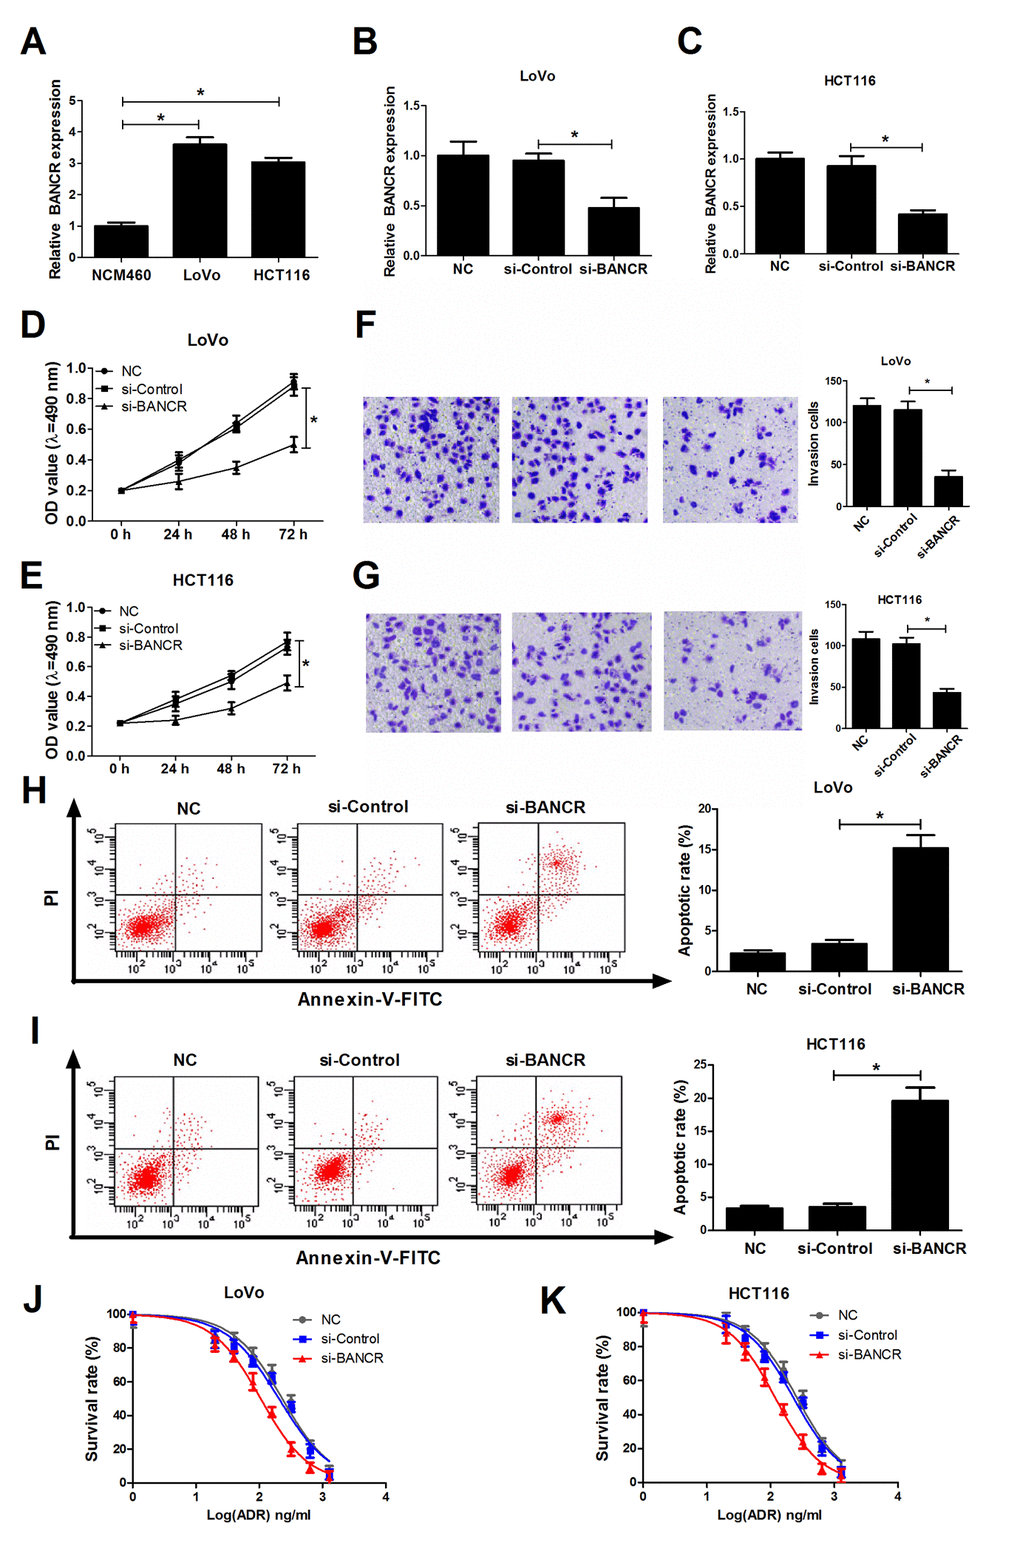 BANCR knockdown suppressed invasion, proliferation, induced apoptosis and increased ADR sensitivity in CRC cells. (A) Expression of BANCR in human normal colon mucosal epithelial cell line (NCM460) and CRC cell lines (LoVo and HCT116) was detected using RT-qPCR assay. (B-K) LoVo and HCT116 cells were transfected with si-Control or si-BANCR with untransfected (NC) or si-Control-transfected cells acted as blank or mock control, respectively. (B and C) Knockdown efficiency of si-BANCR was evaluated by RT-qPCR assays at 48 h upon transfection. (D and E) The effect of BANCR depletion on proliferation ability was measured by MTT assay at the indicated time points (0, 24, 48, 72 h) upon transfection in LoVo and HCT116 cells. (F and G) The effect of BANCR knockdown on invasion capability was assessed at 48 h after transfection by transwell invasion assay in LoVo and HCT116 cells. (H and I) The effect of BANCR deficiency on apoptotic rate was detected in LoVo and HCT116 cells at 48 h posttransfection by flow cytometry via double-staining of Annexin-V-FITC and PI. (J and K) LoVo and HCT116 cells were treated with different concentrations of ADR (0, 20, 40, 80, 160, 320, 640, 1280 ng/ml) for 48 h, followed by the determination of cell survival rate using MTT assay. *P 